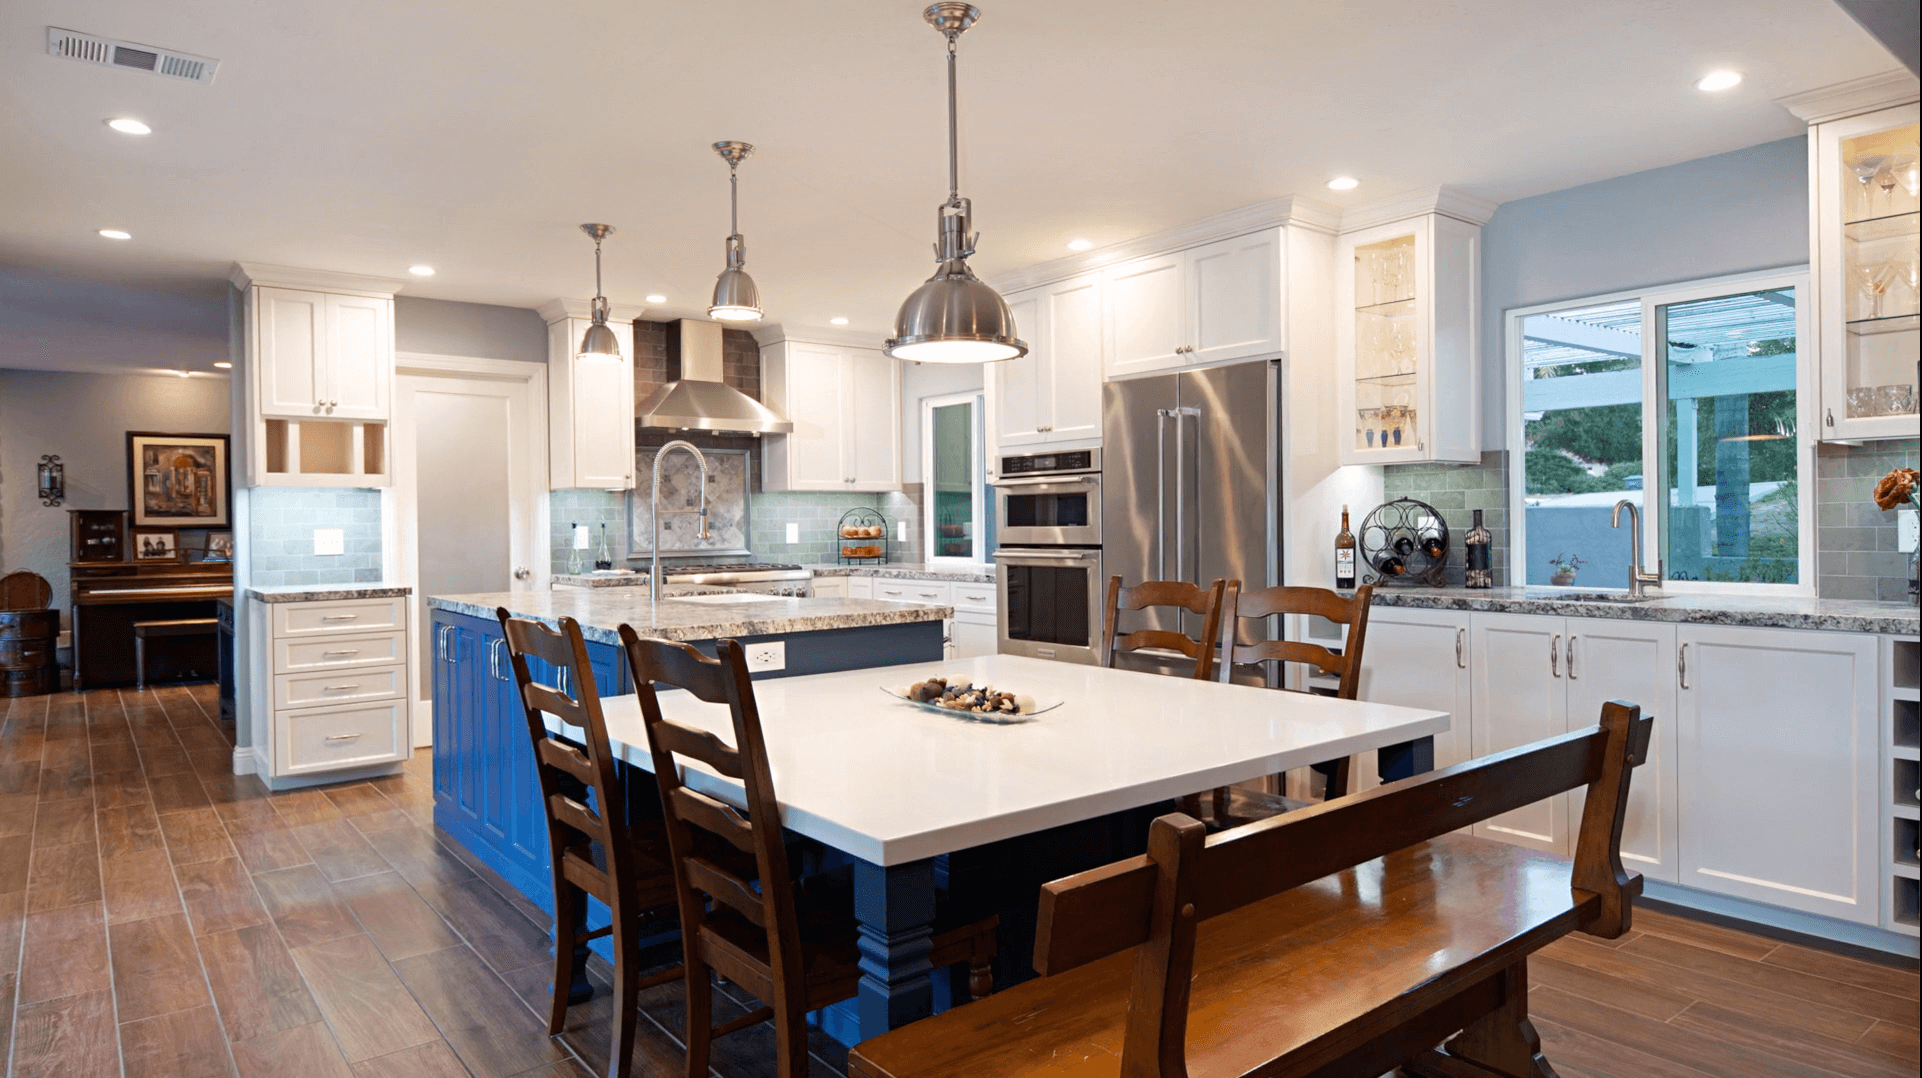 A successful kitchen remodel will unite form and function